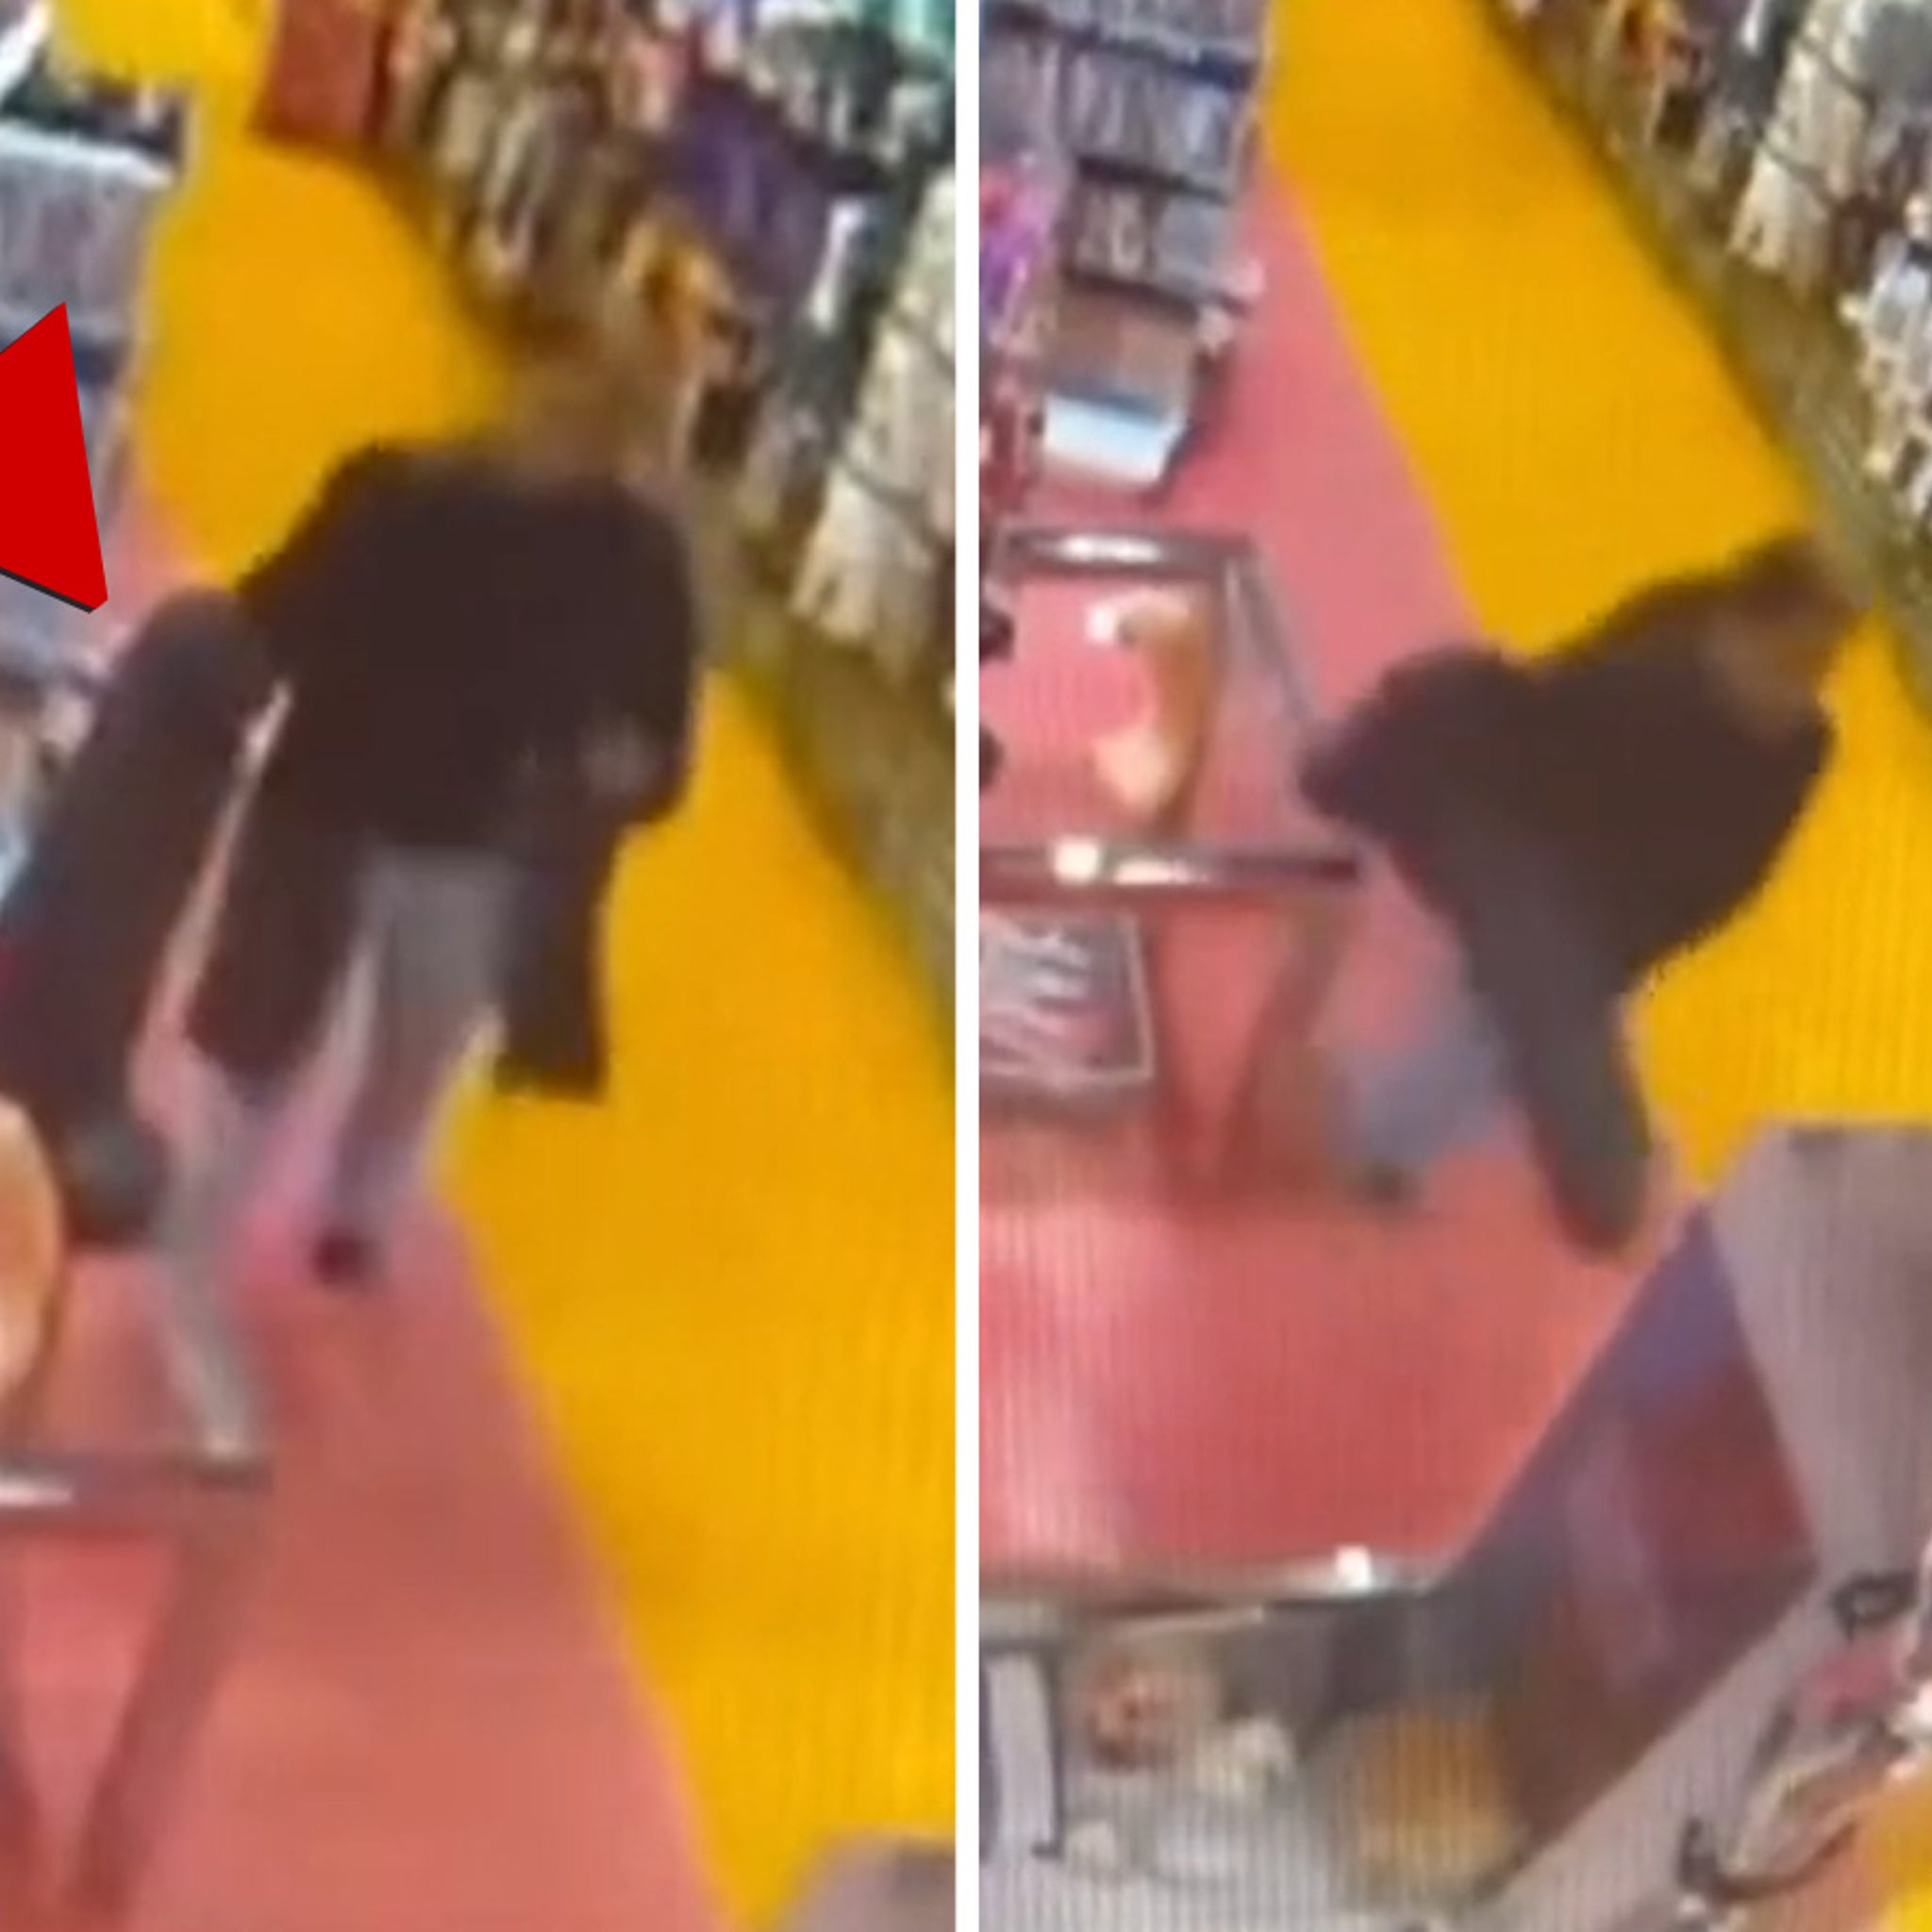 Adult Store Shopper Tries to Steal 30-Inch Dildo, Caught on Camera pic photo